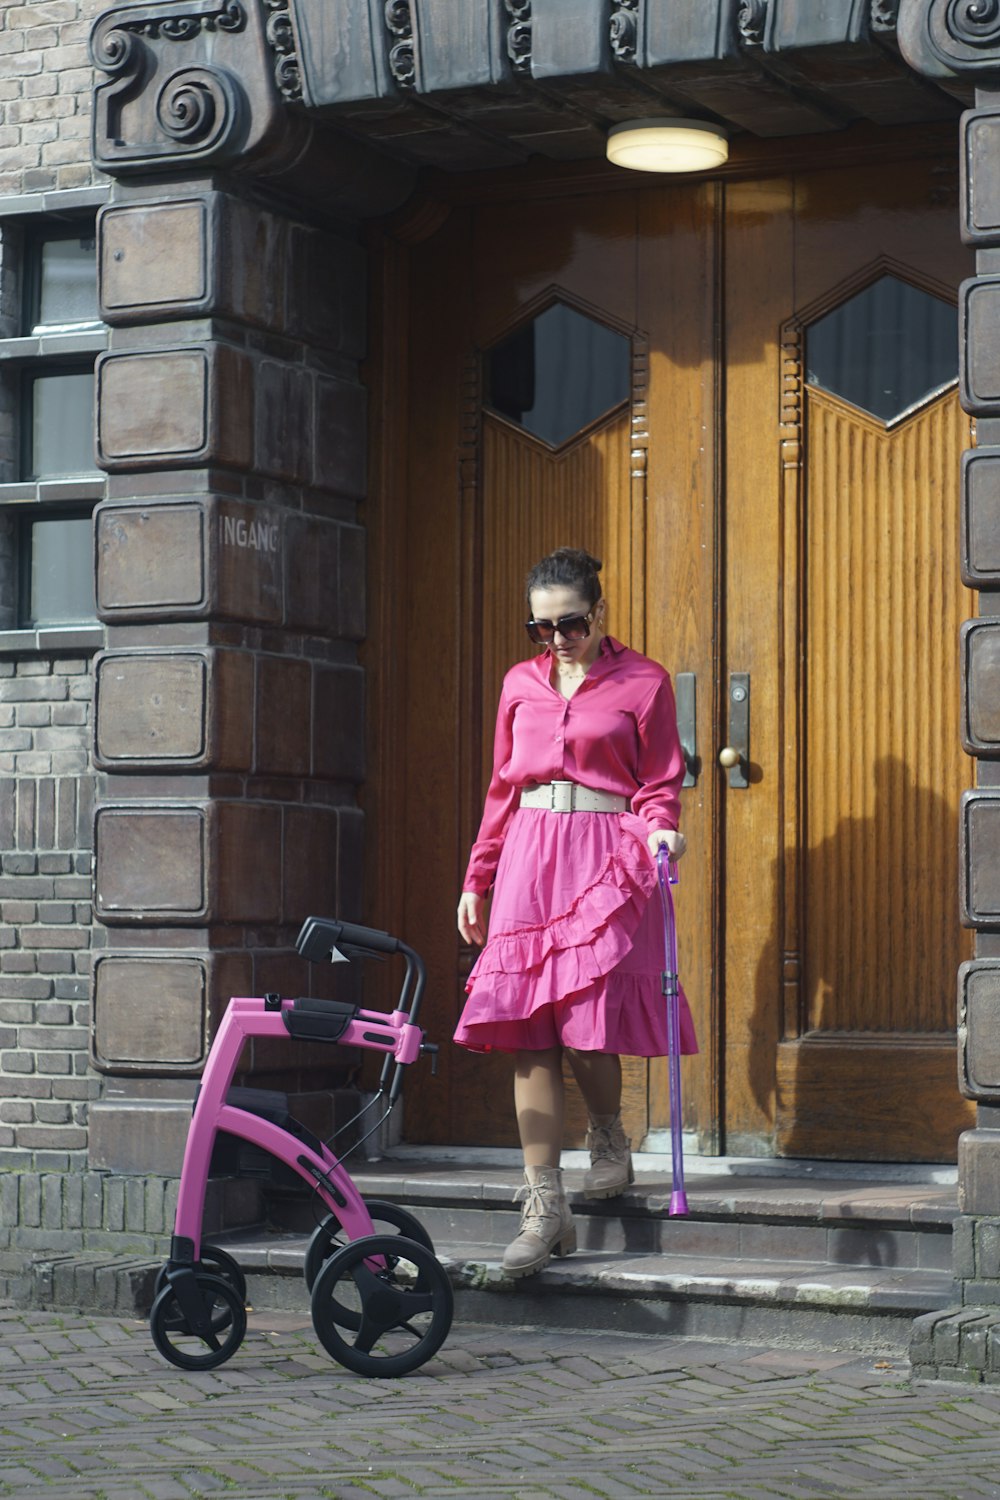 a woman in a pink dress is holding a cane